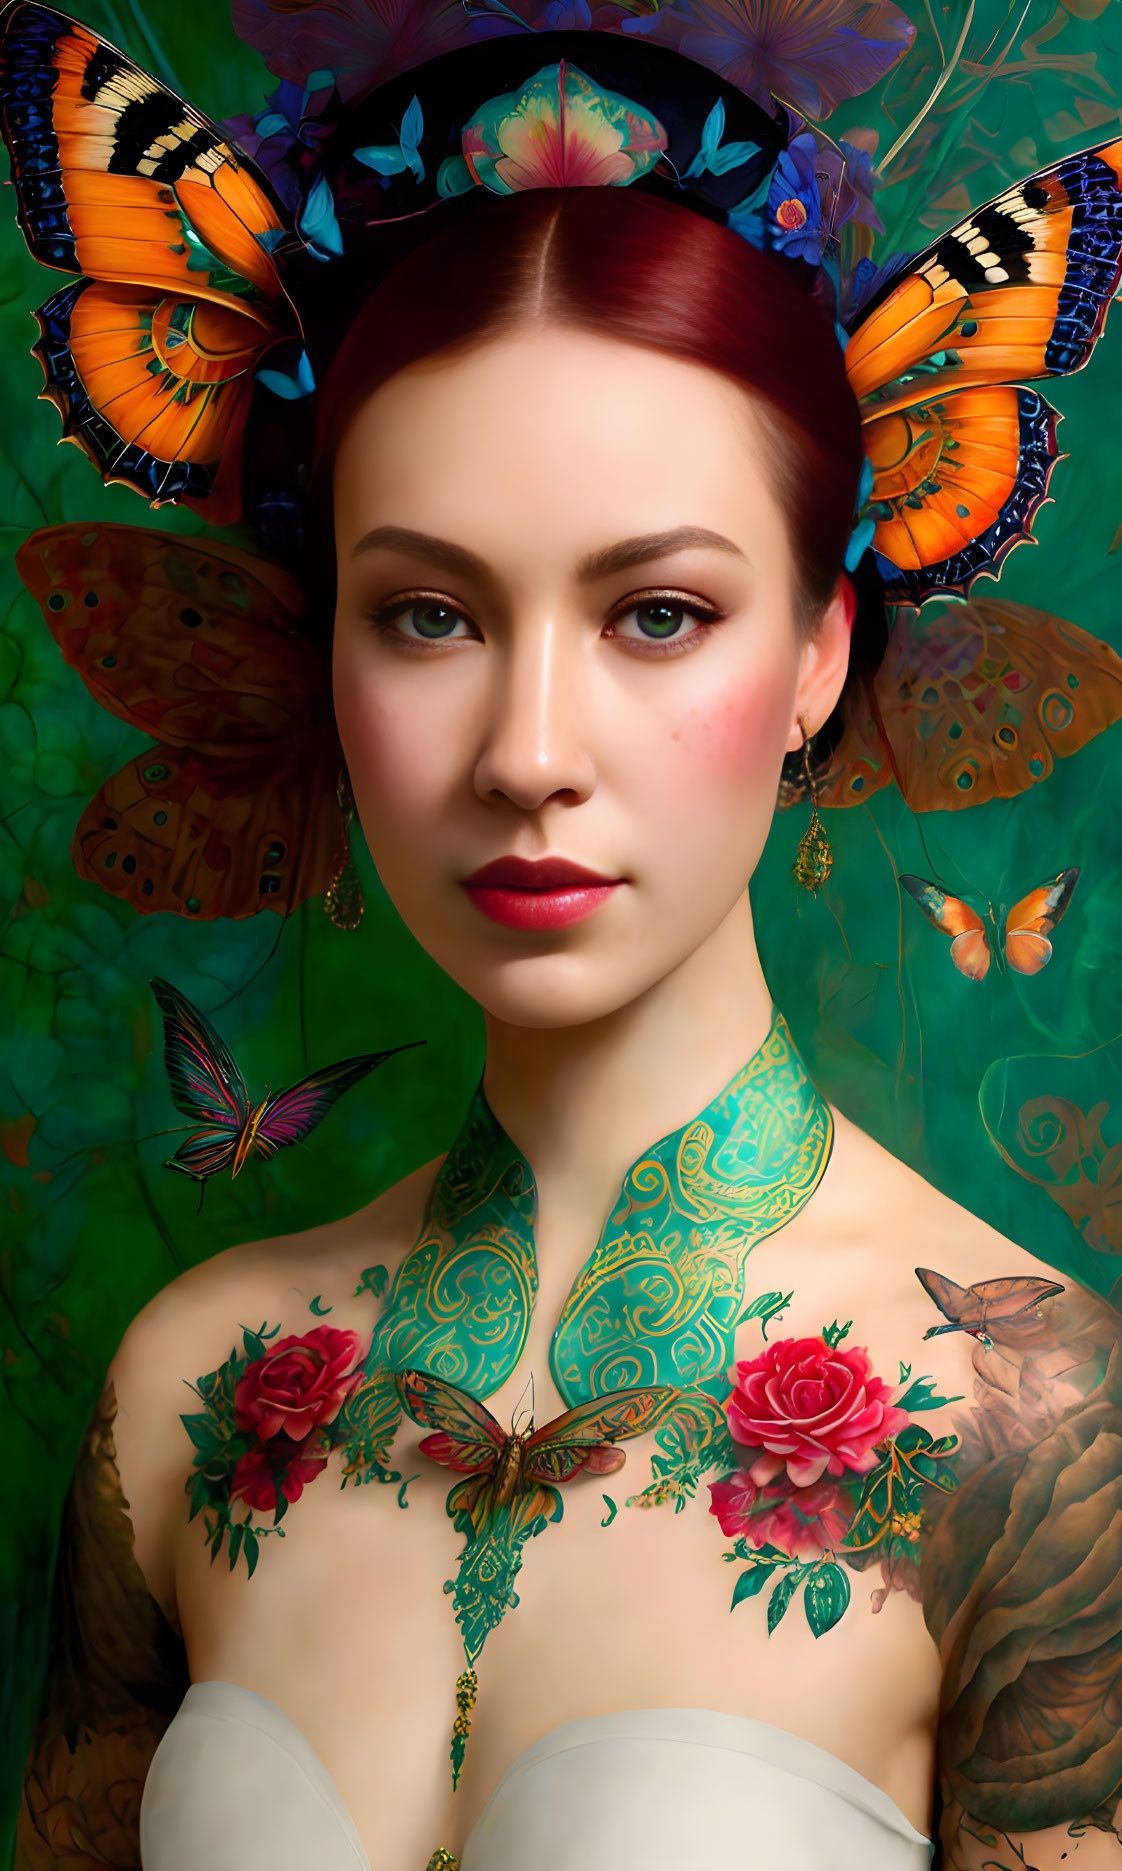 Red-haired woman with tattoos adorned with colorful butterflies and floral patterns on green backdrop